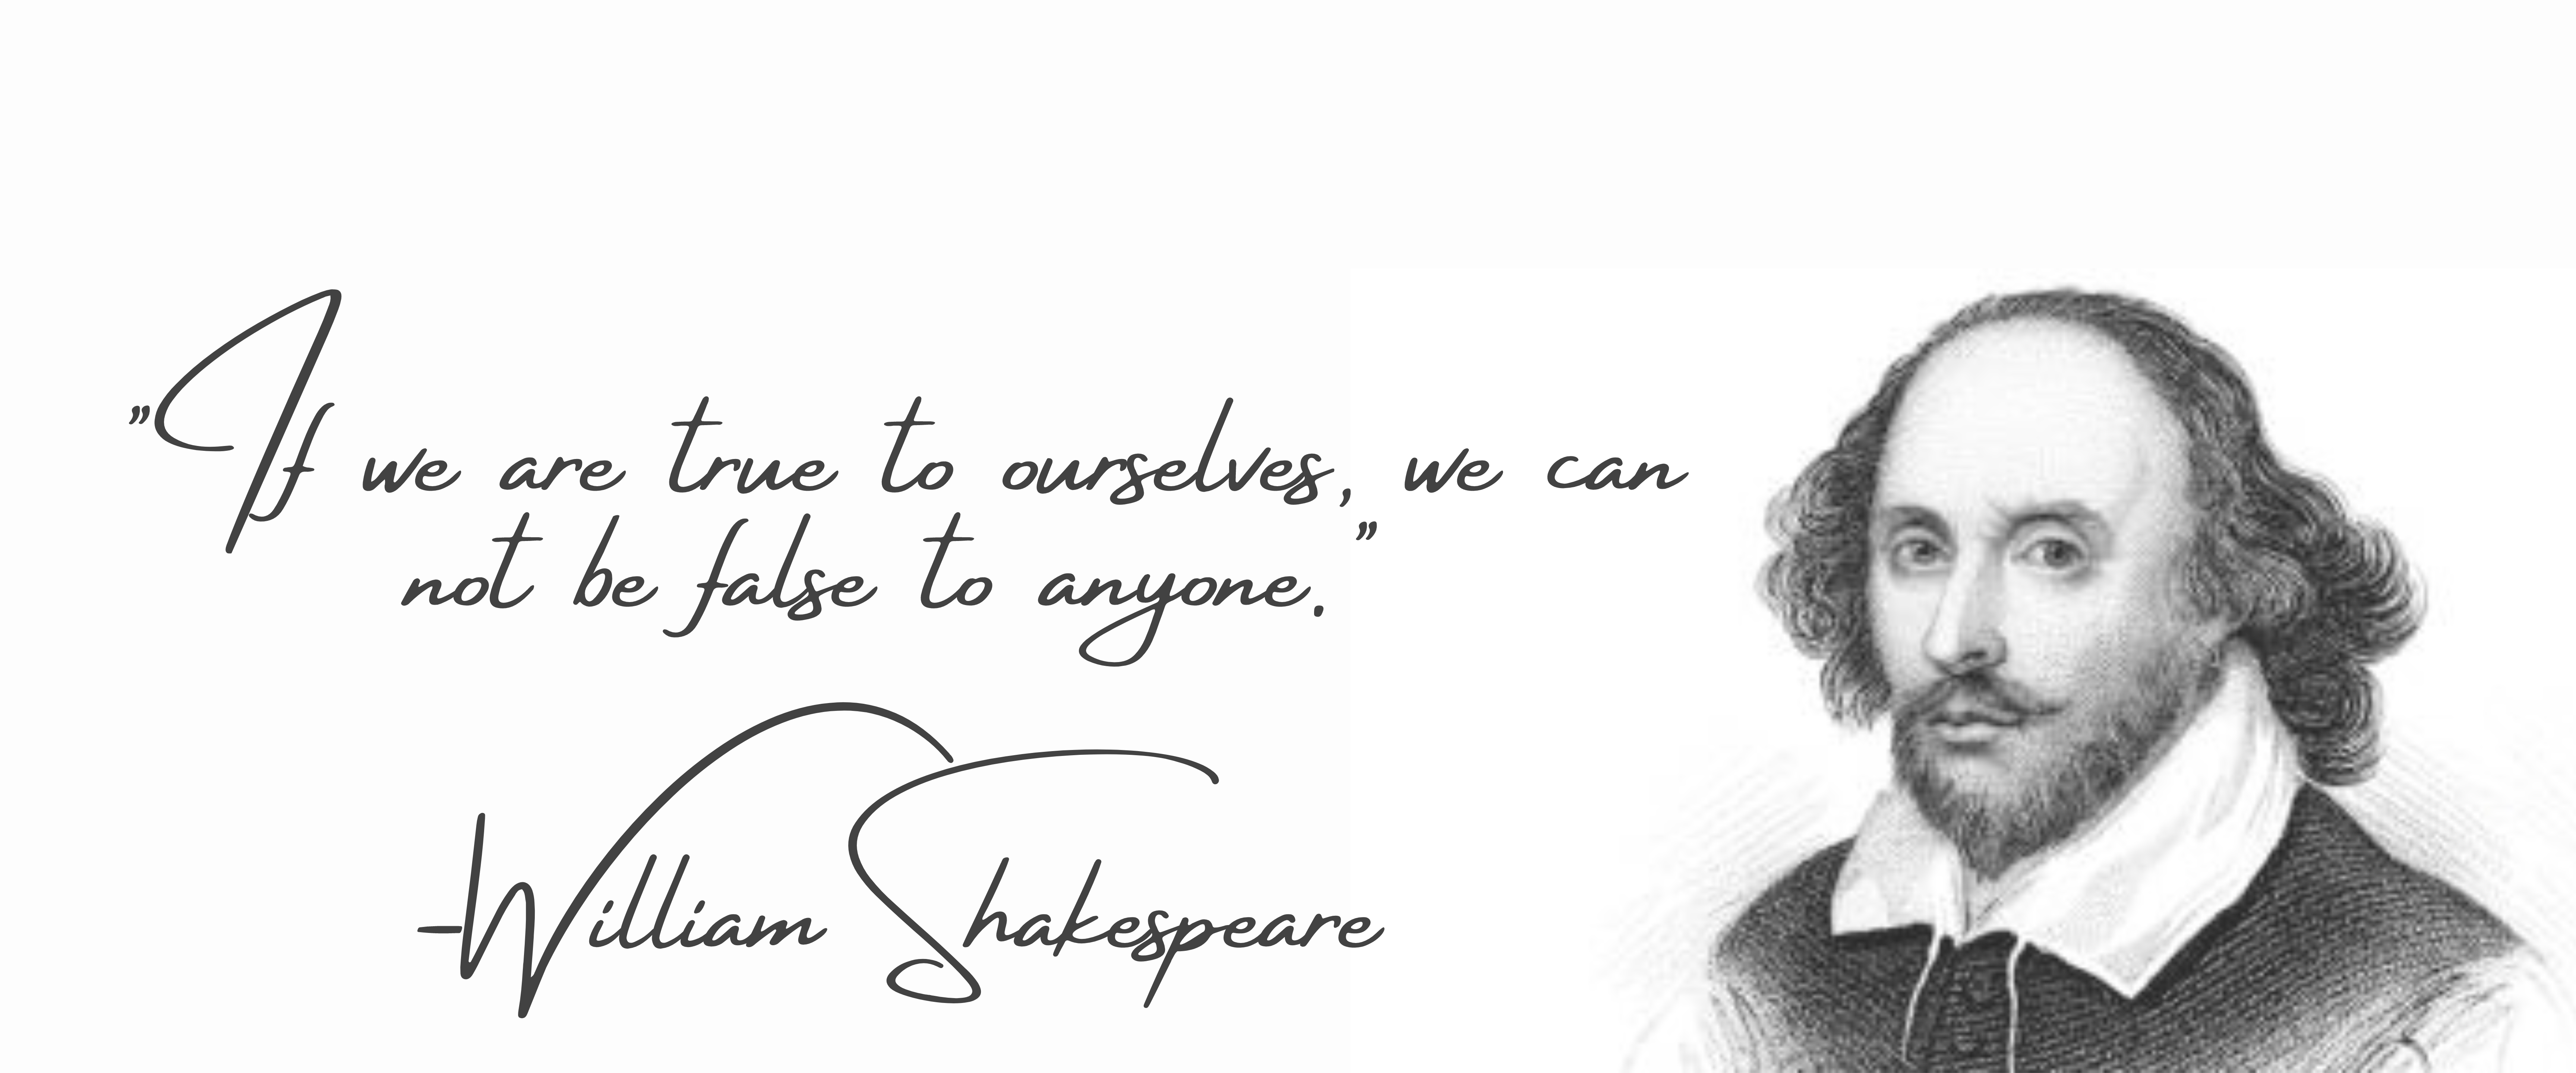 Quote: "If we are true to ourselves, we can not be false to anyone." - William Shakespeare